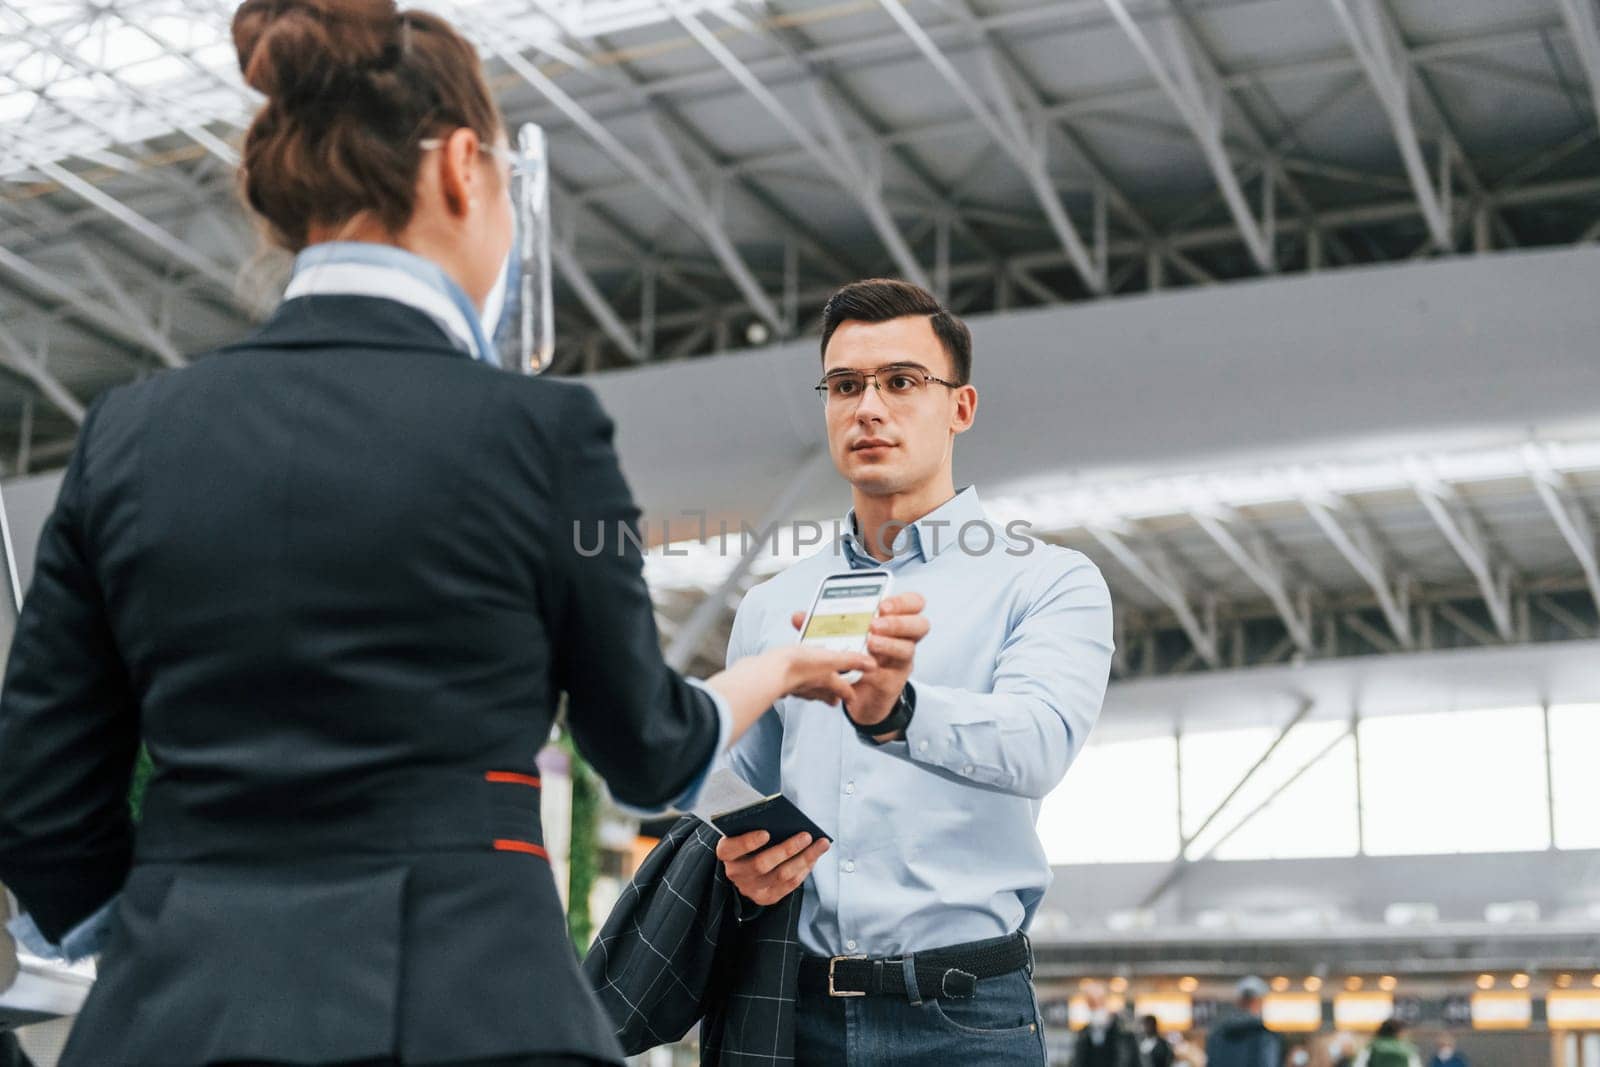 Man showing vaccination certificate. Young businessman in formal clothes is in the airport at daytime.